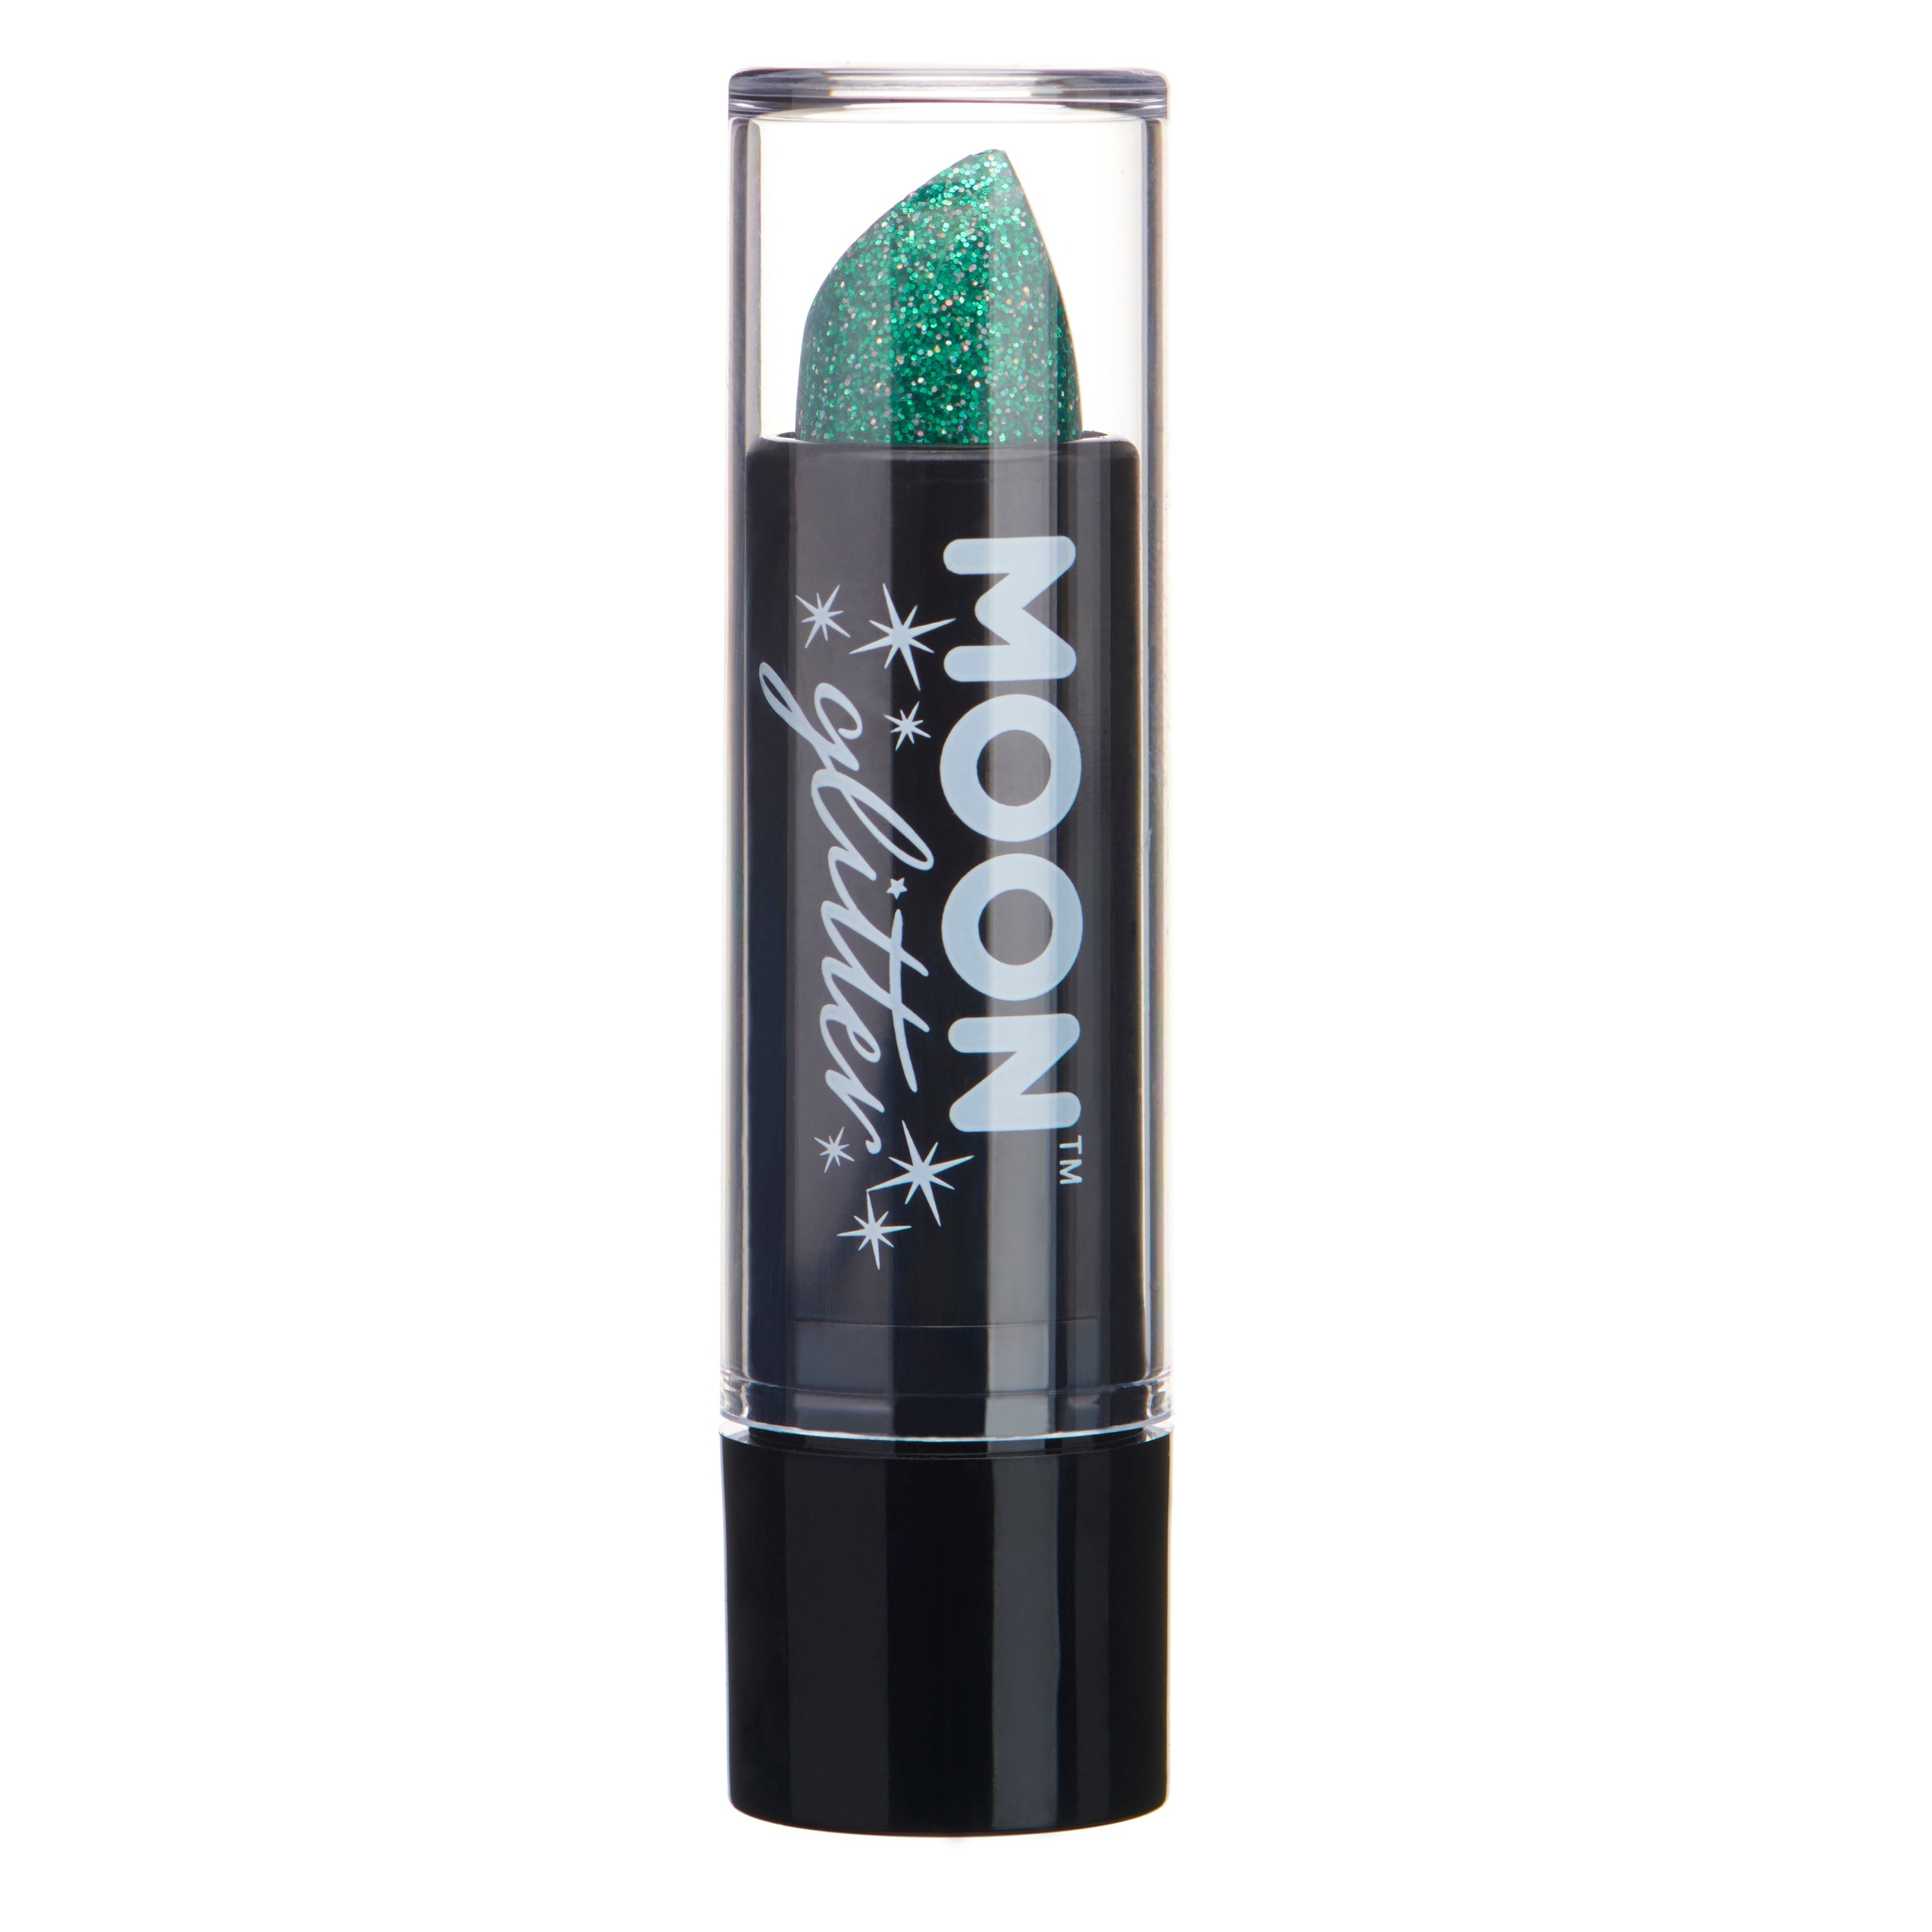 Green - Holographic Glitter Liptick, 5g. Cosmetically certified, FDA & Health Canada compliant and cruelty free.